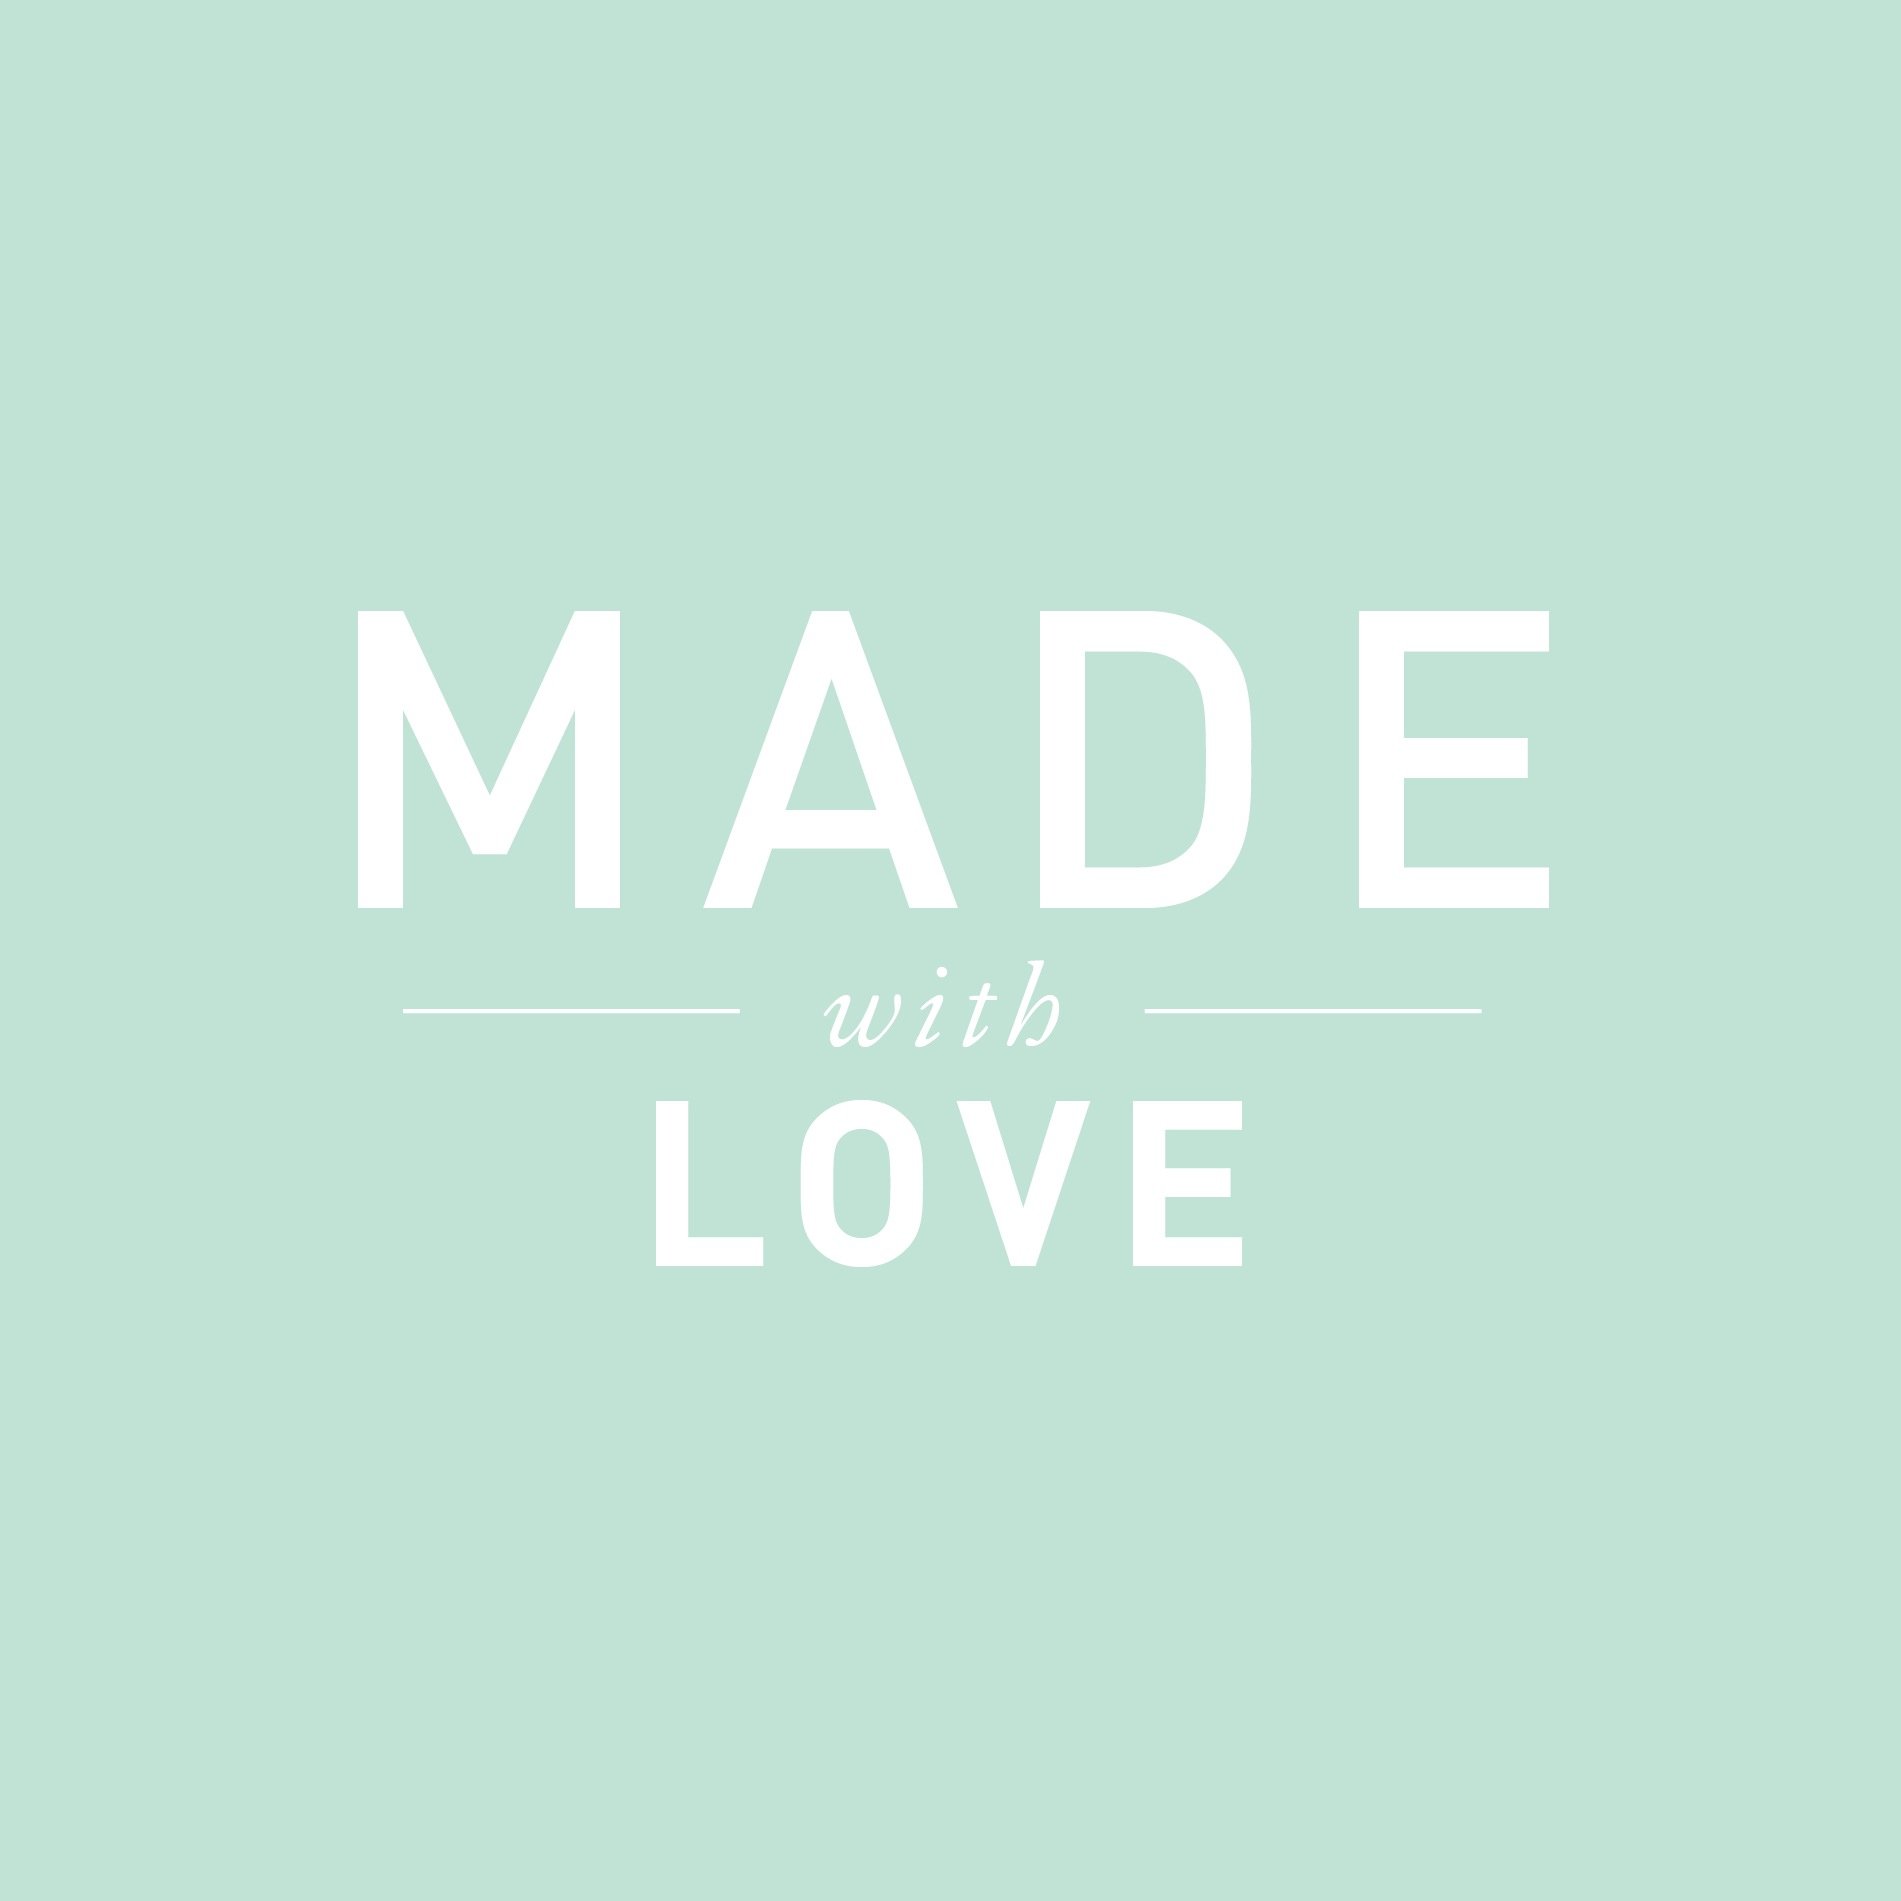 sweet treats all made with love in the heart of London. Instagram @madewithlove_x